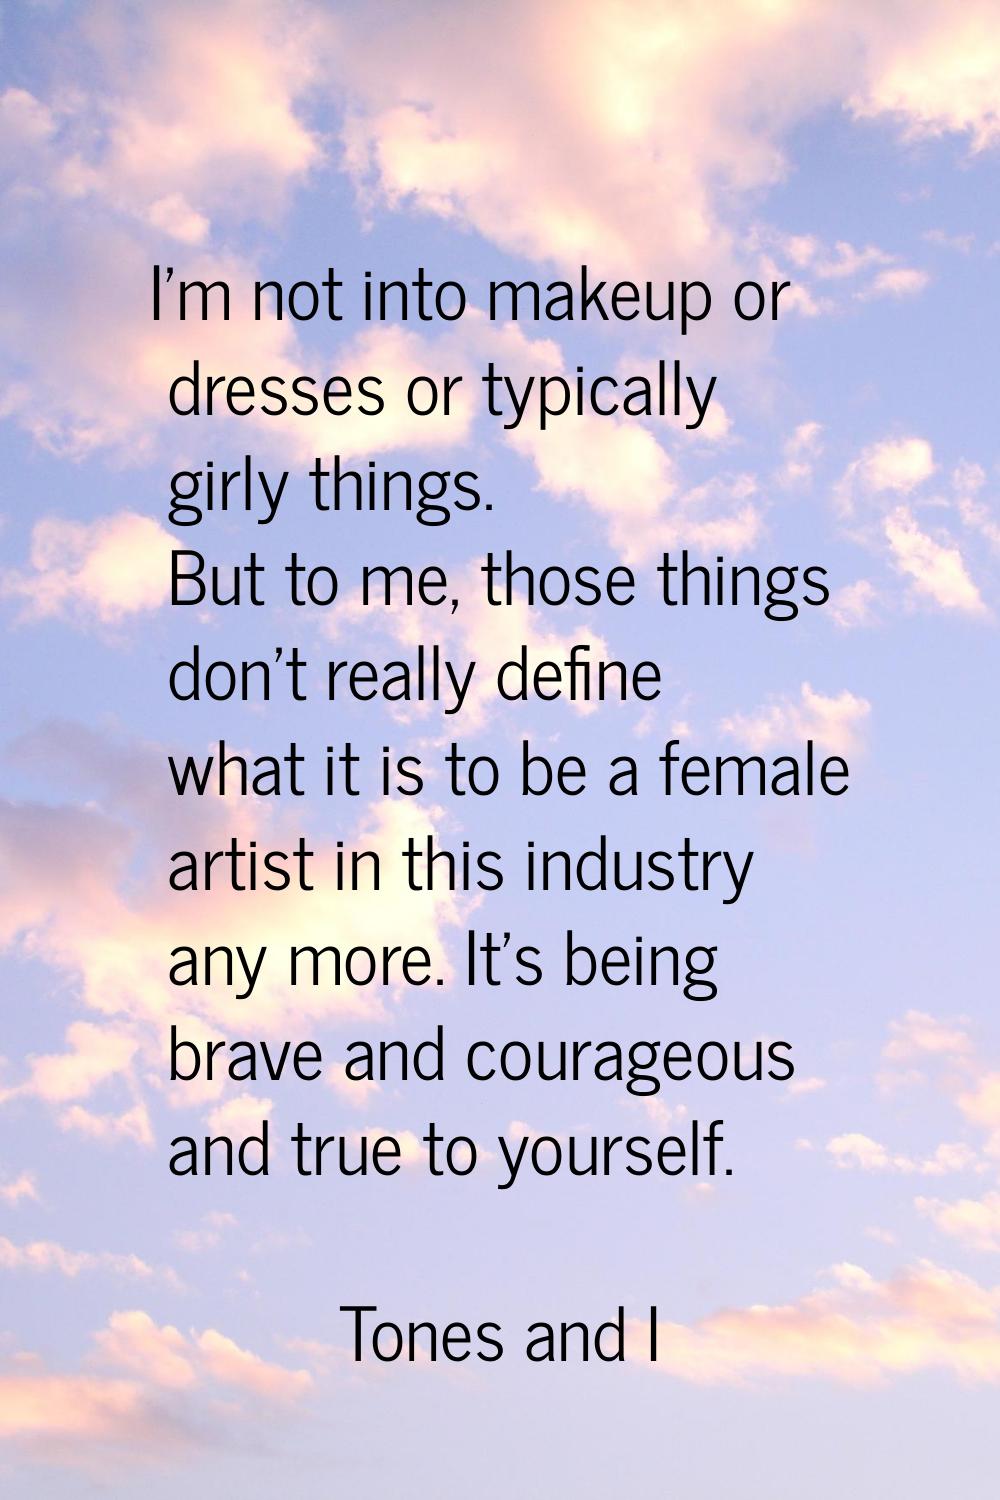 I'm not into makeup or dresses or typically girly things. But to me, those things don't really defi